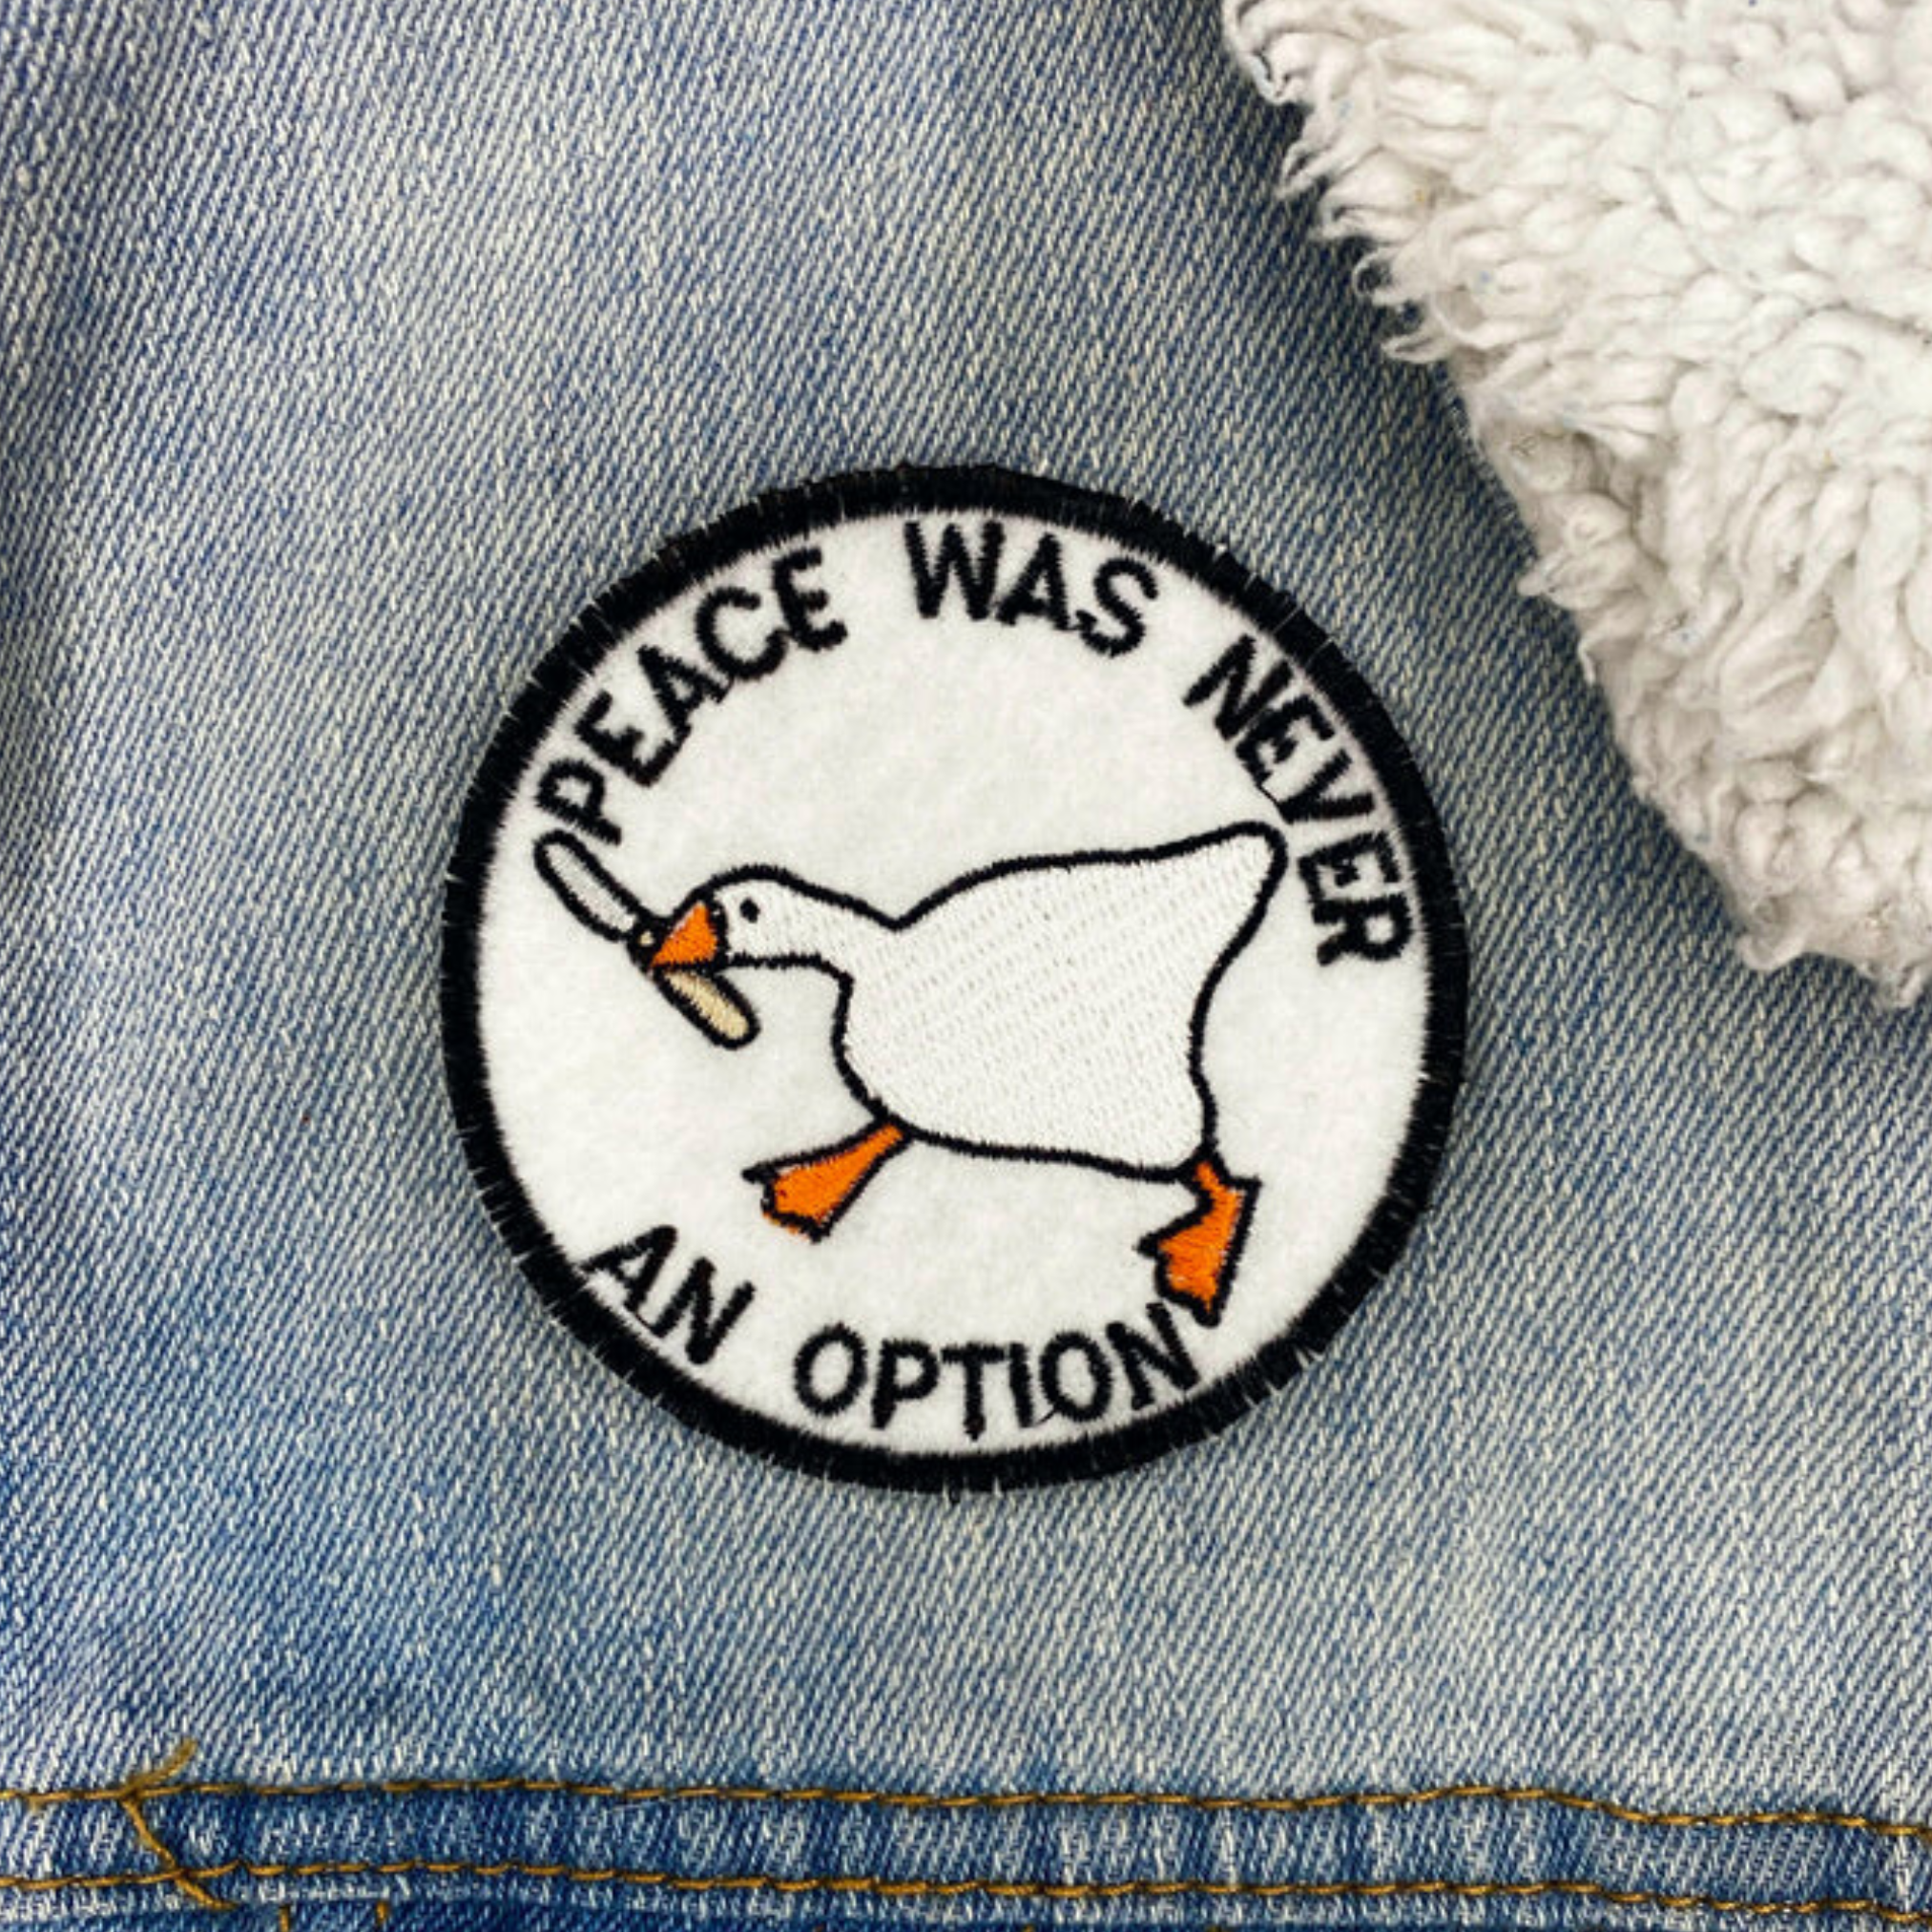 Untitled Goose Game "Peace Was Never An Option" Embroidered Iron-on Patch